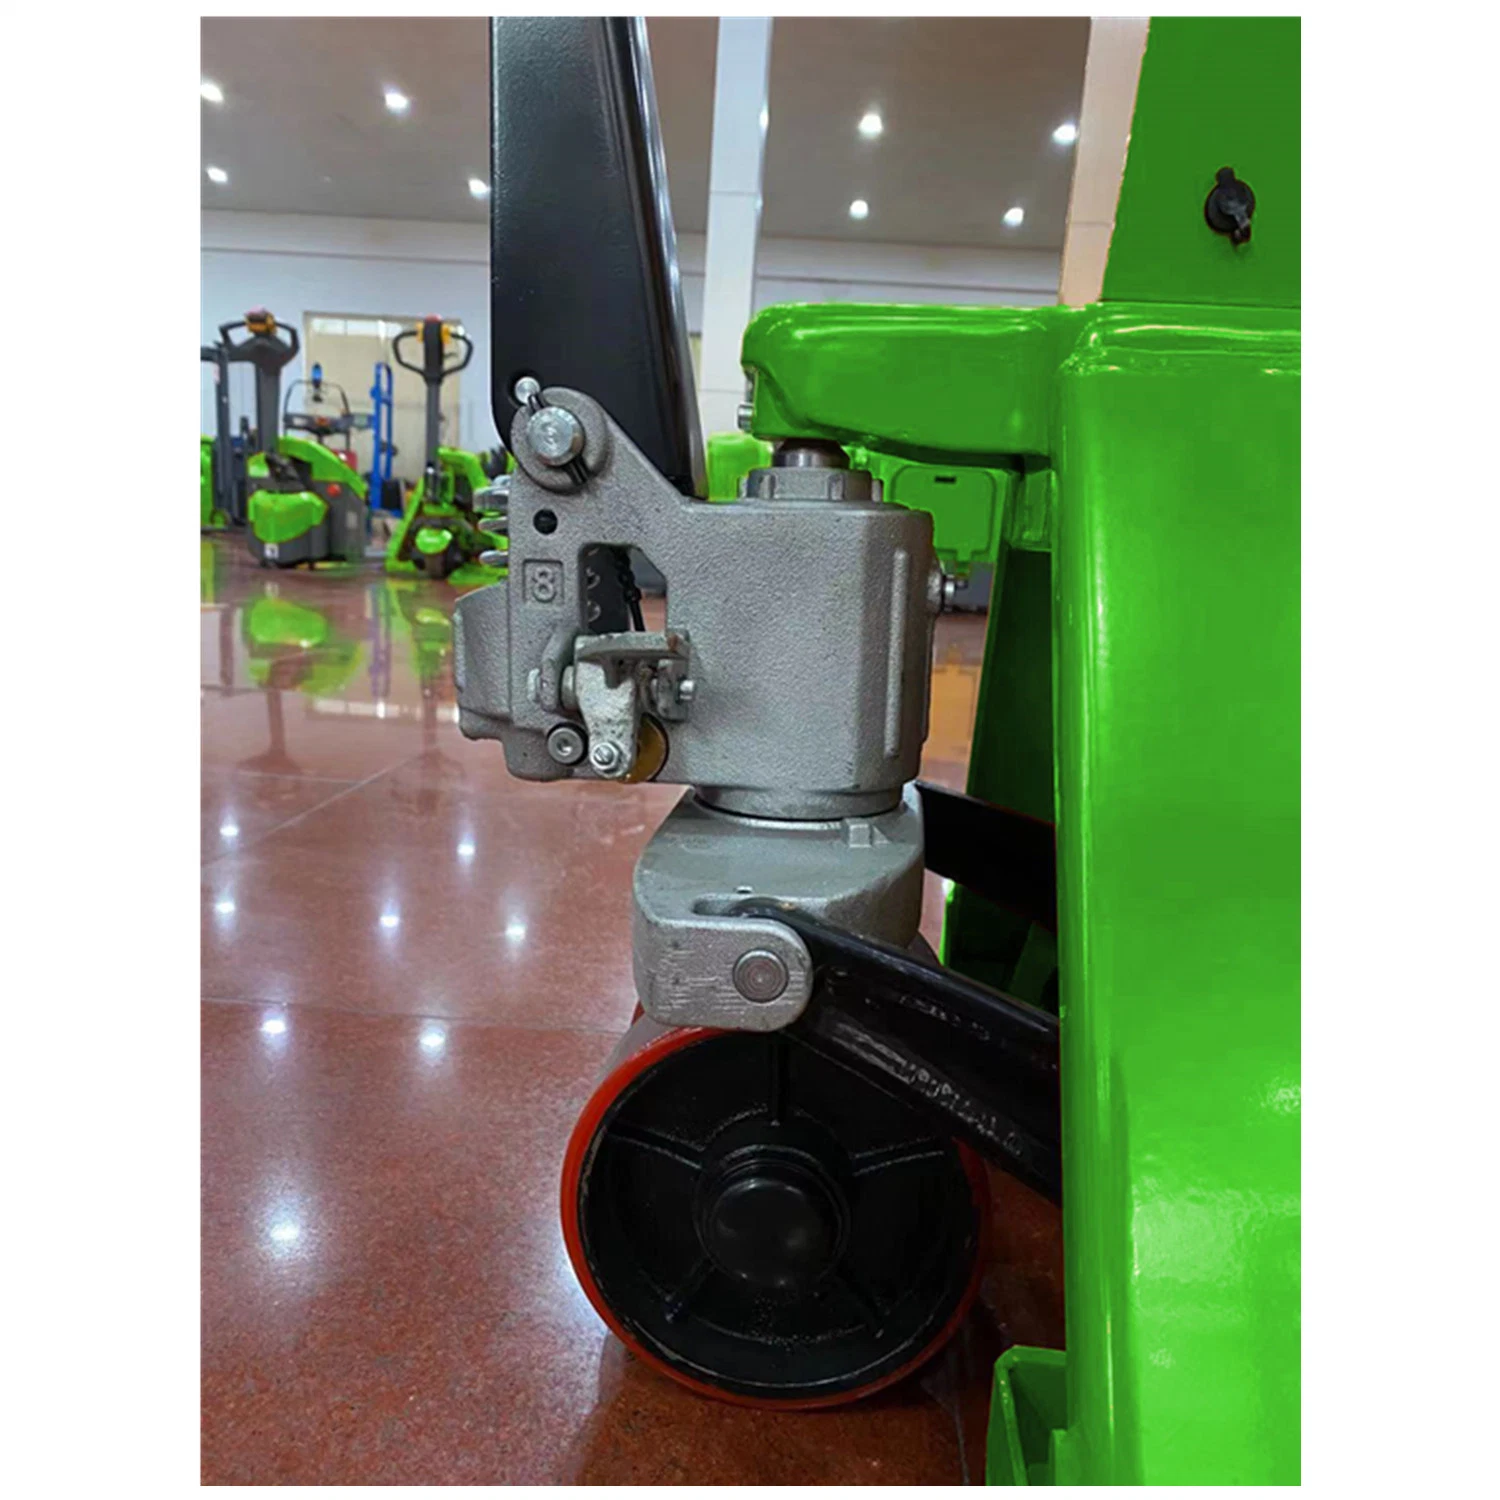 2.5 Ton Cheap Low Profile Hydraulic Hand Pallet Truck Scale Price